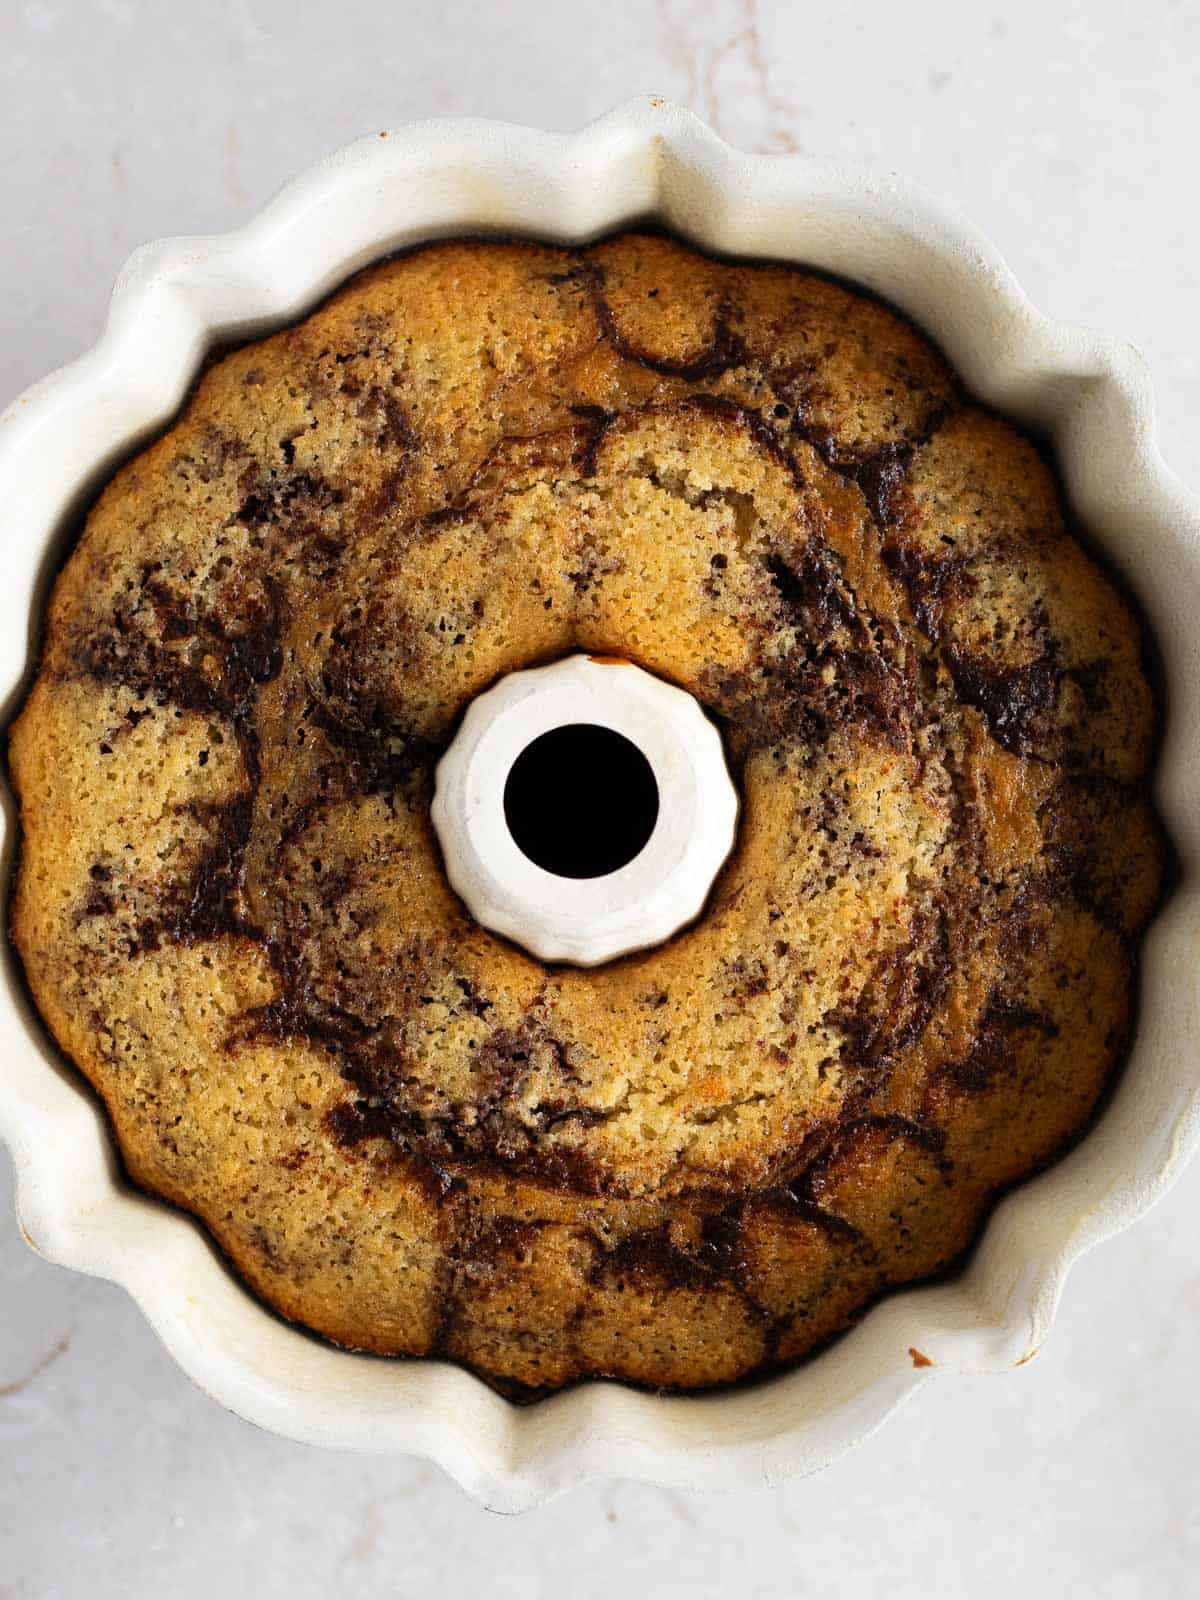 Baked buttermilk marble bundt cake in the pan.